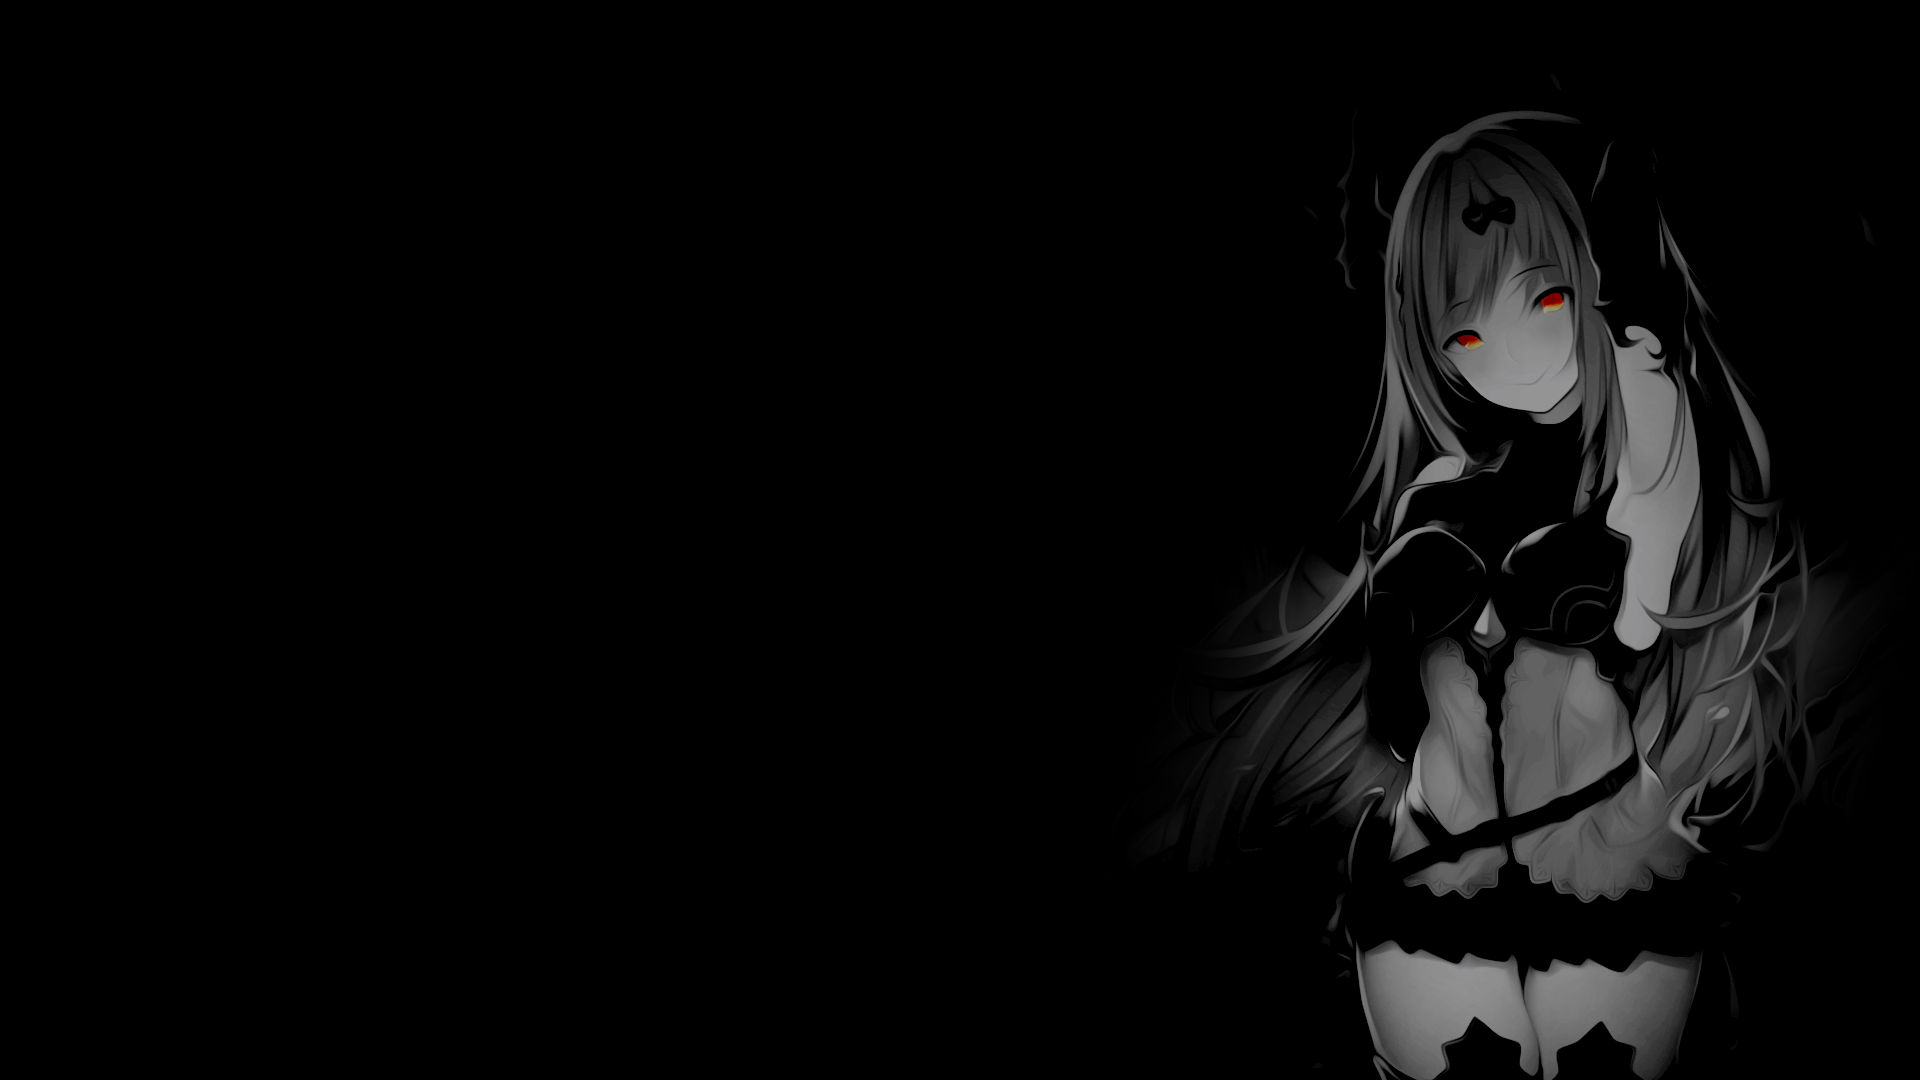 Wallpaper  anime girls black background dark background simple  background selective coloring 3840x2160  sGary  2219492  HD Wallpapers   WallHere